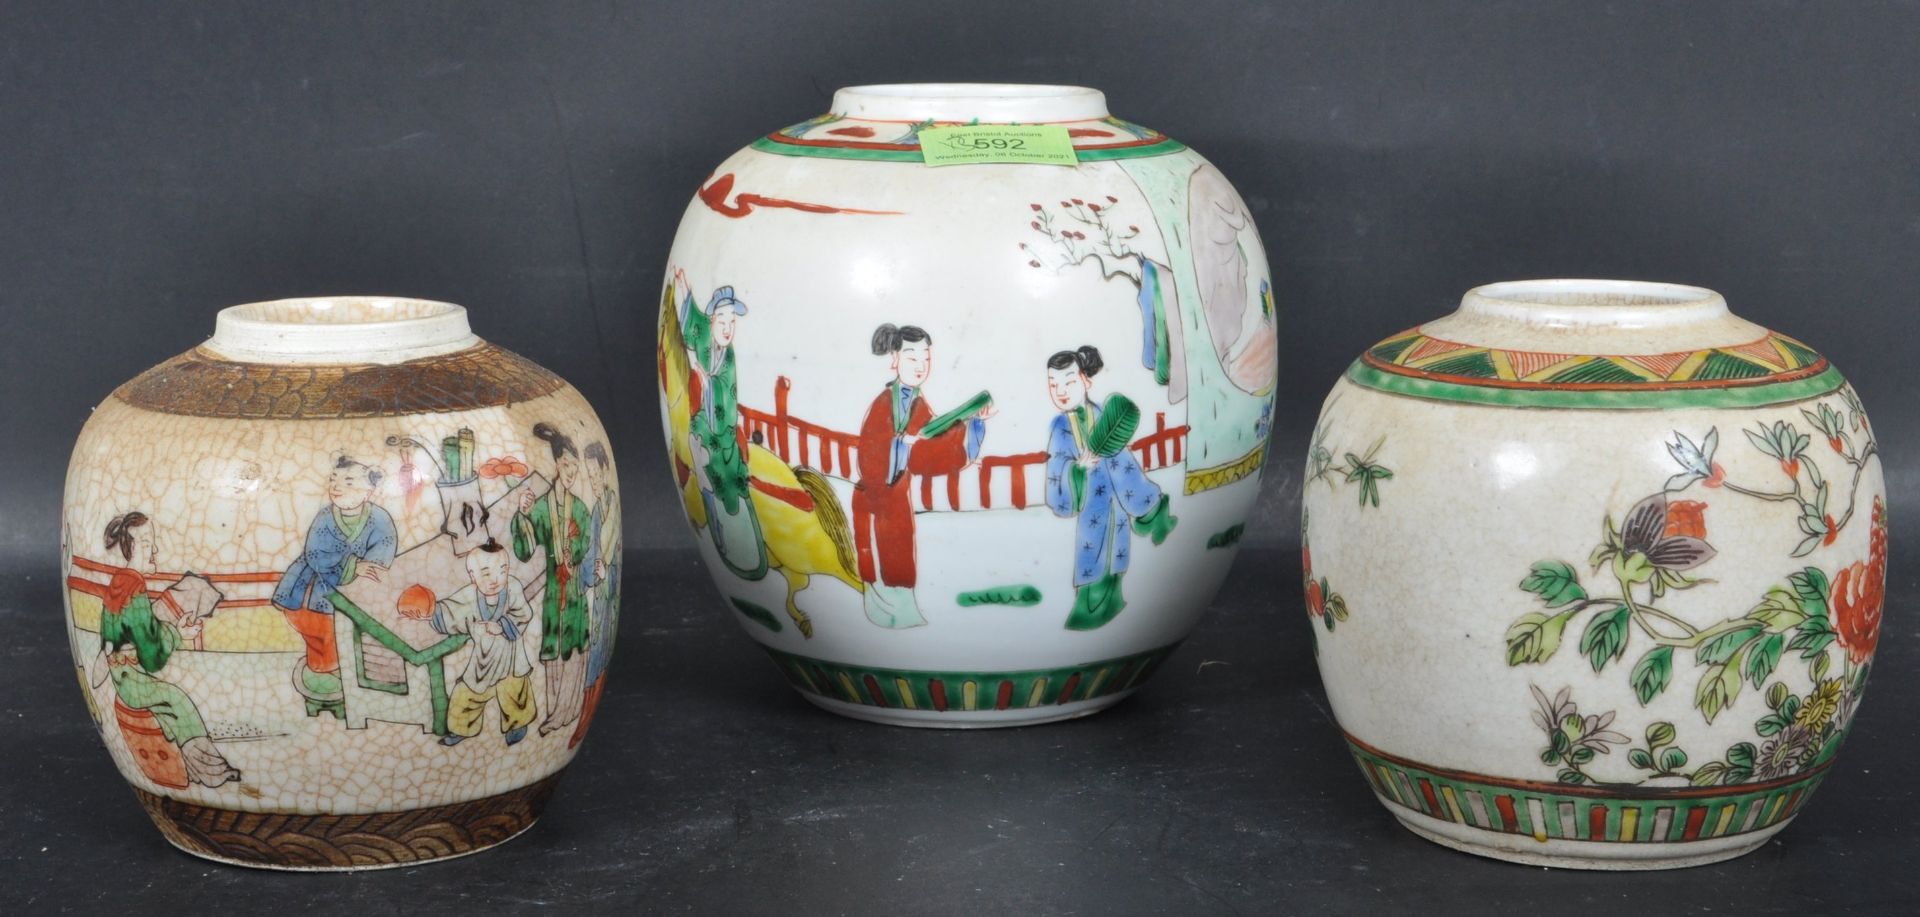 COLLECTION OF THREE 20TH CENTURY CHINESE GINGER JARS